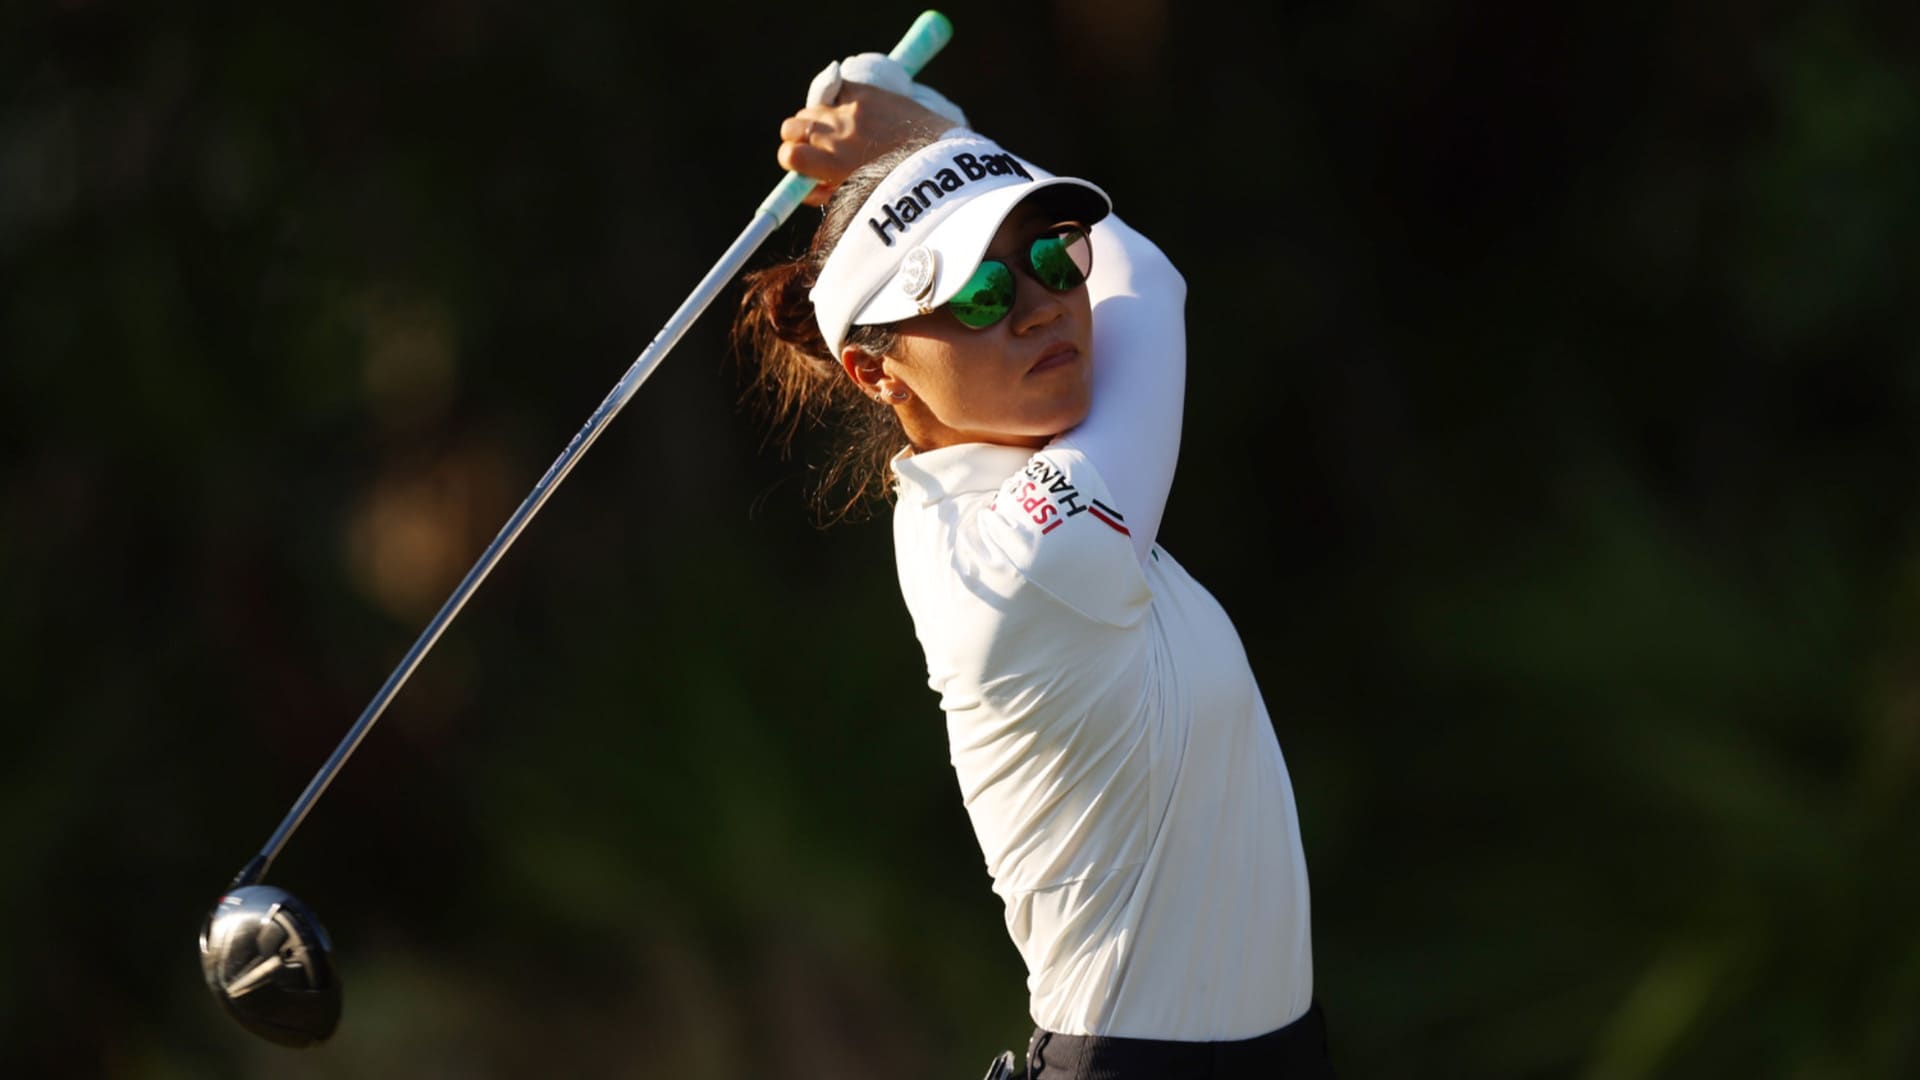 Lydia Ko makes ace, breaks course record during honeymoon